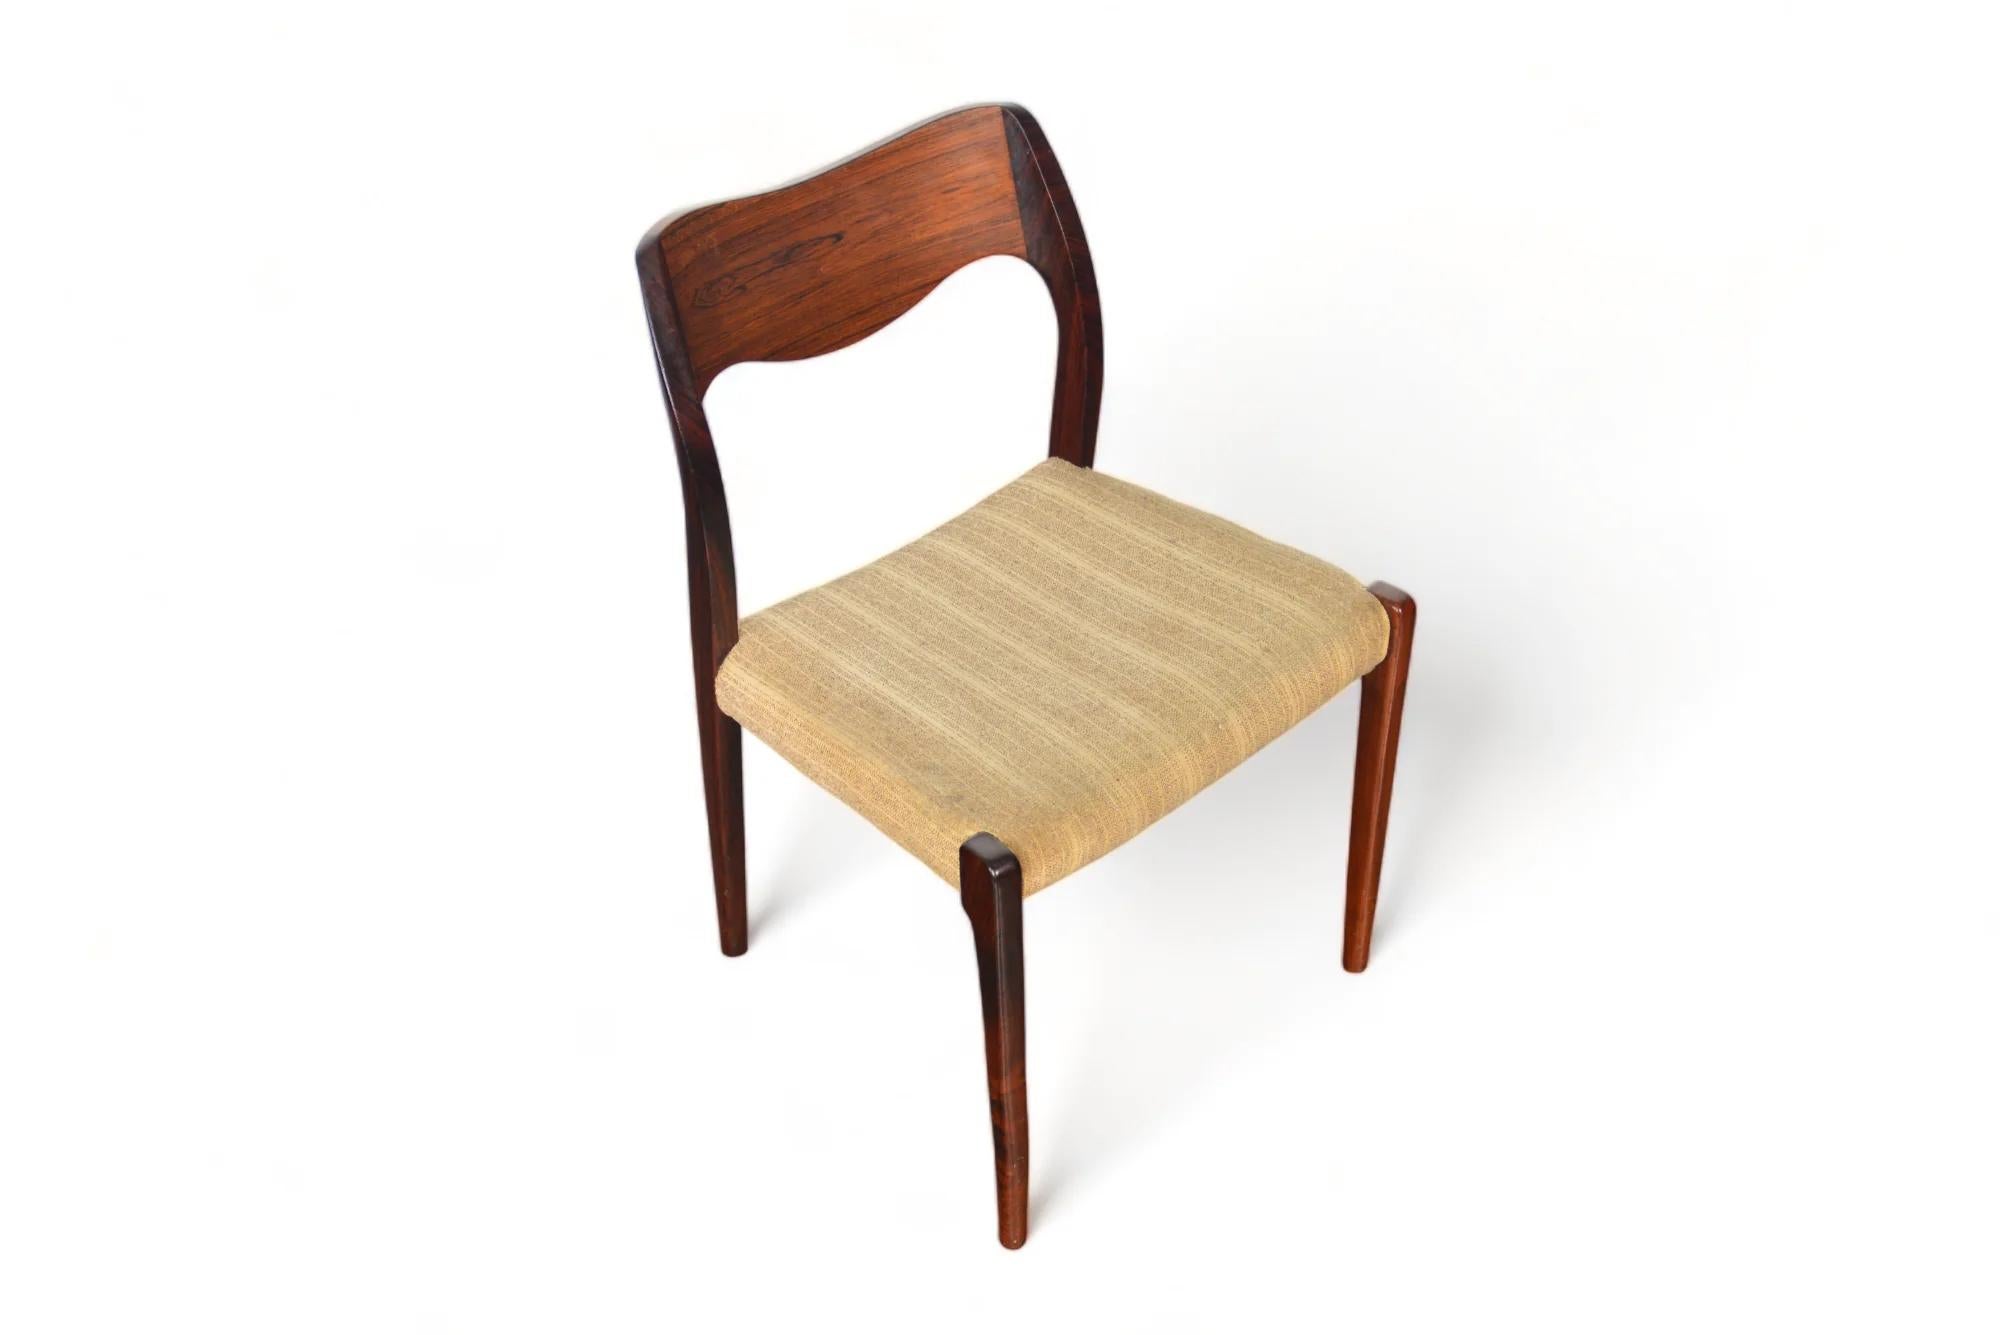 Set Of Six J.l. Møller Model 71 Dining Chairs In Brazilian Rosewood #1 In Good Condition For Sale In Berkeley, CA